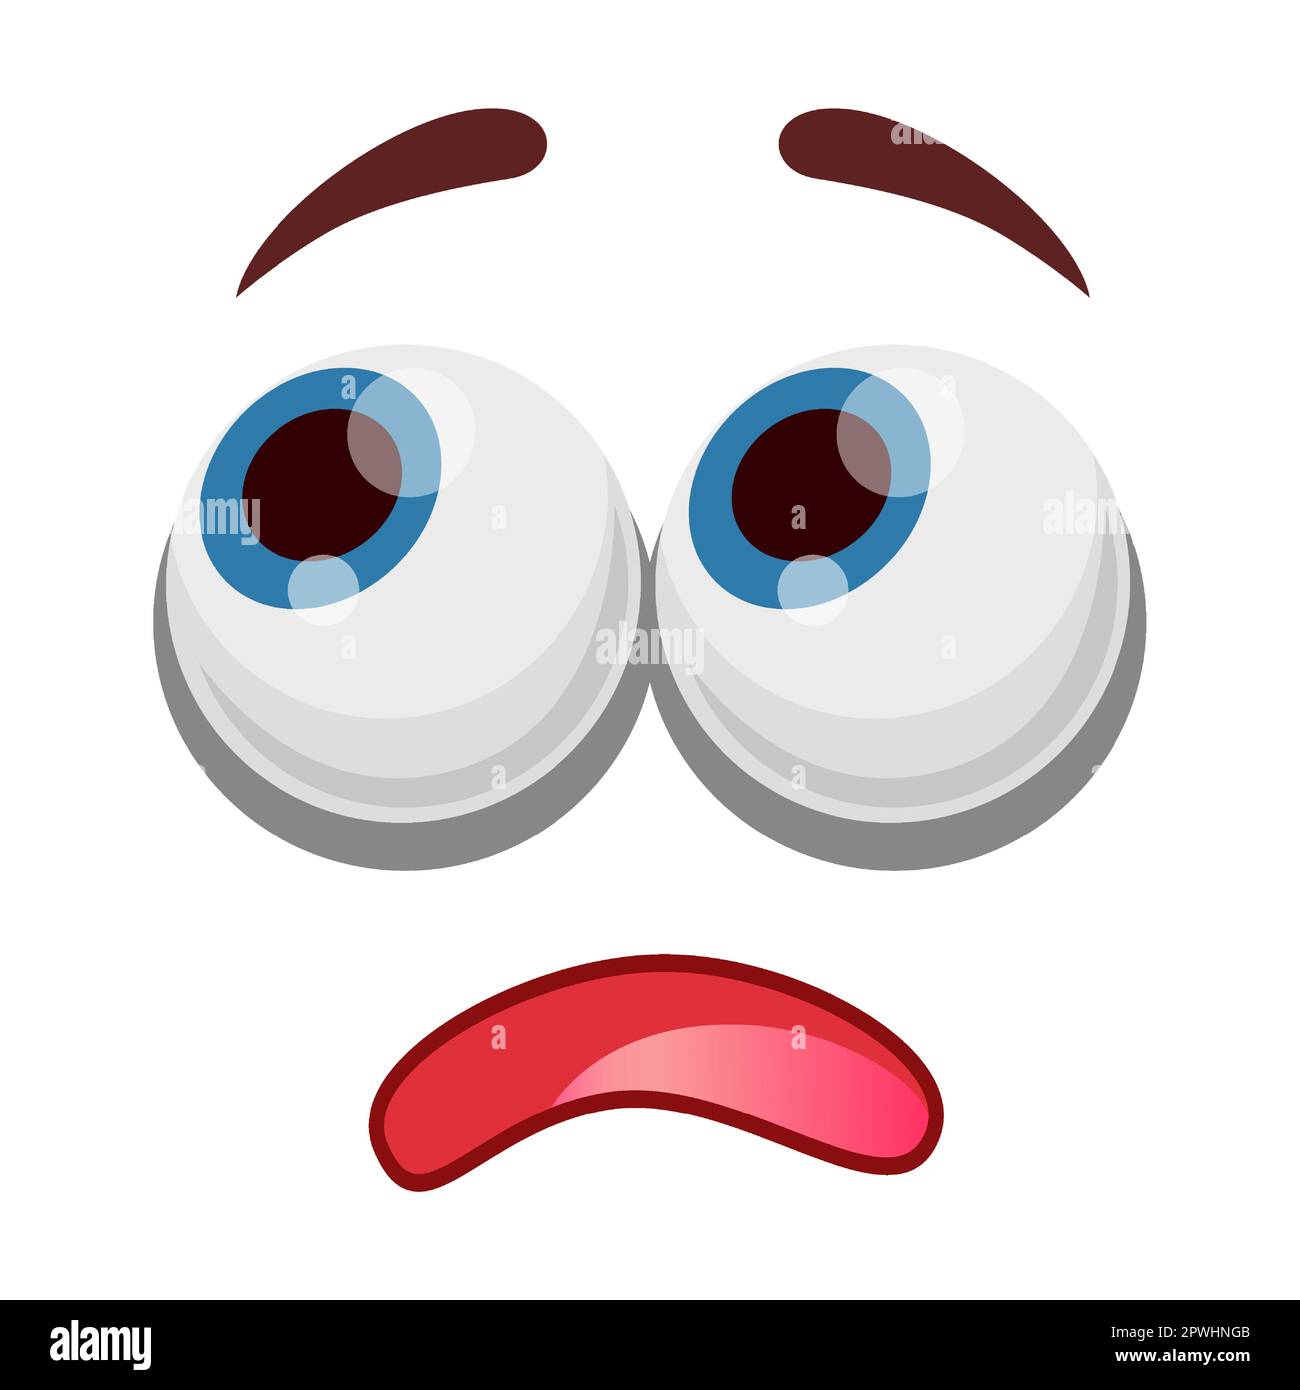 Confused Face Stock Vector Illustration and Royalty Free Confused